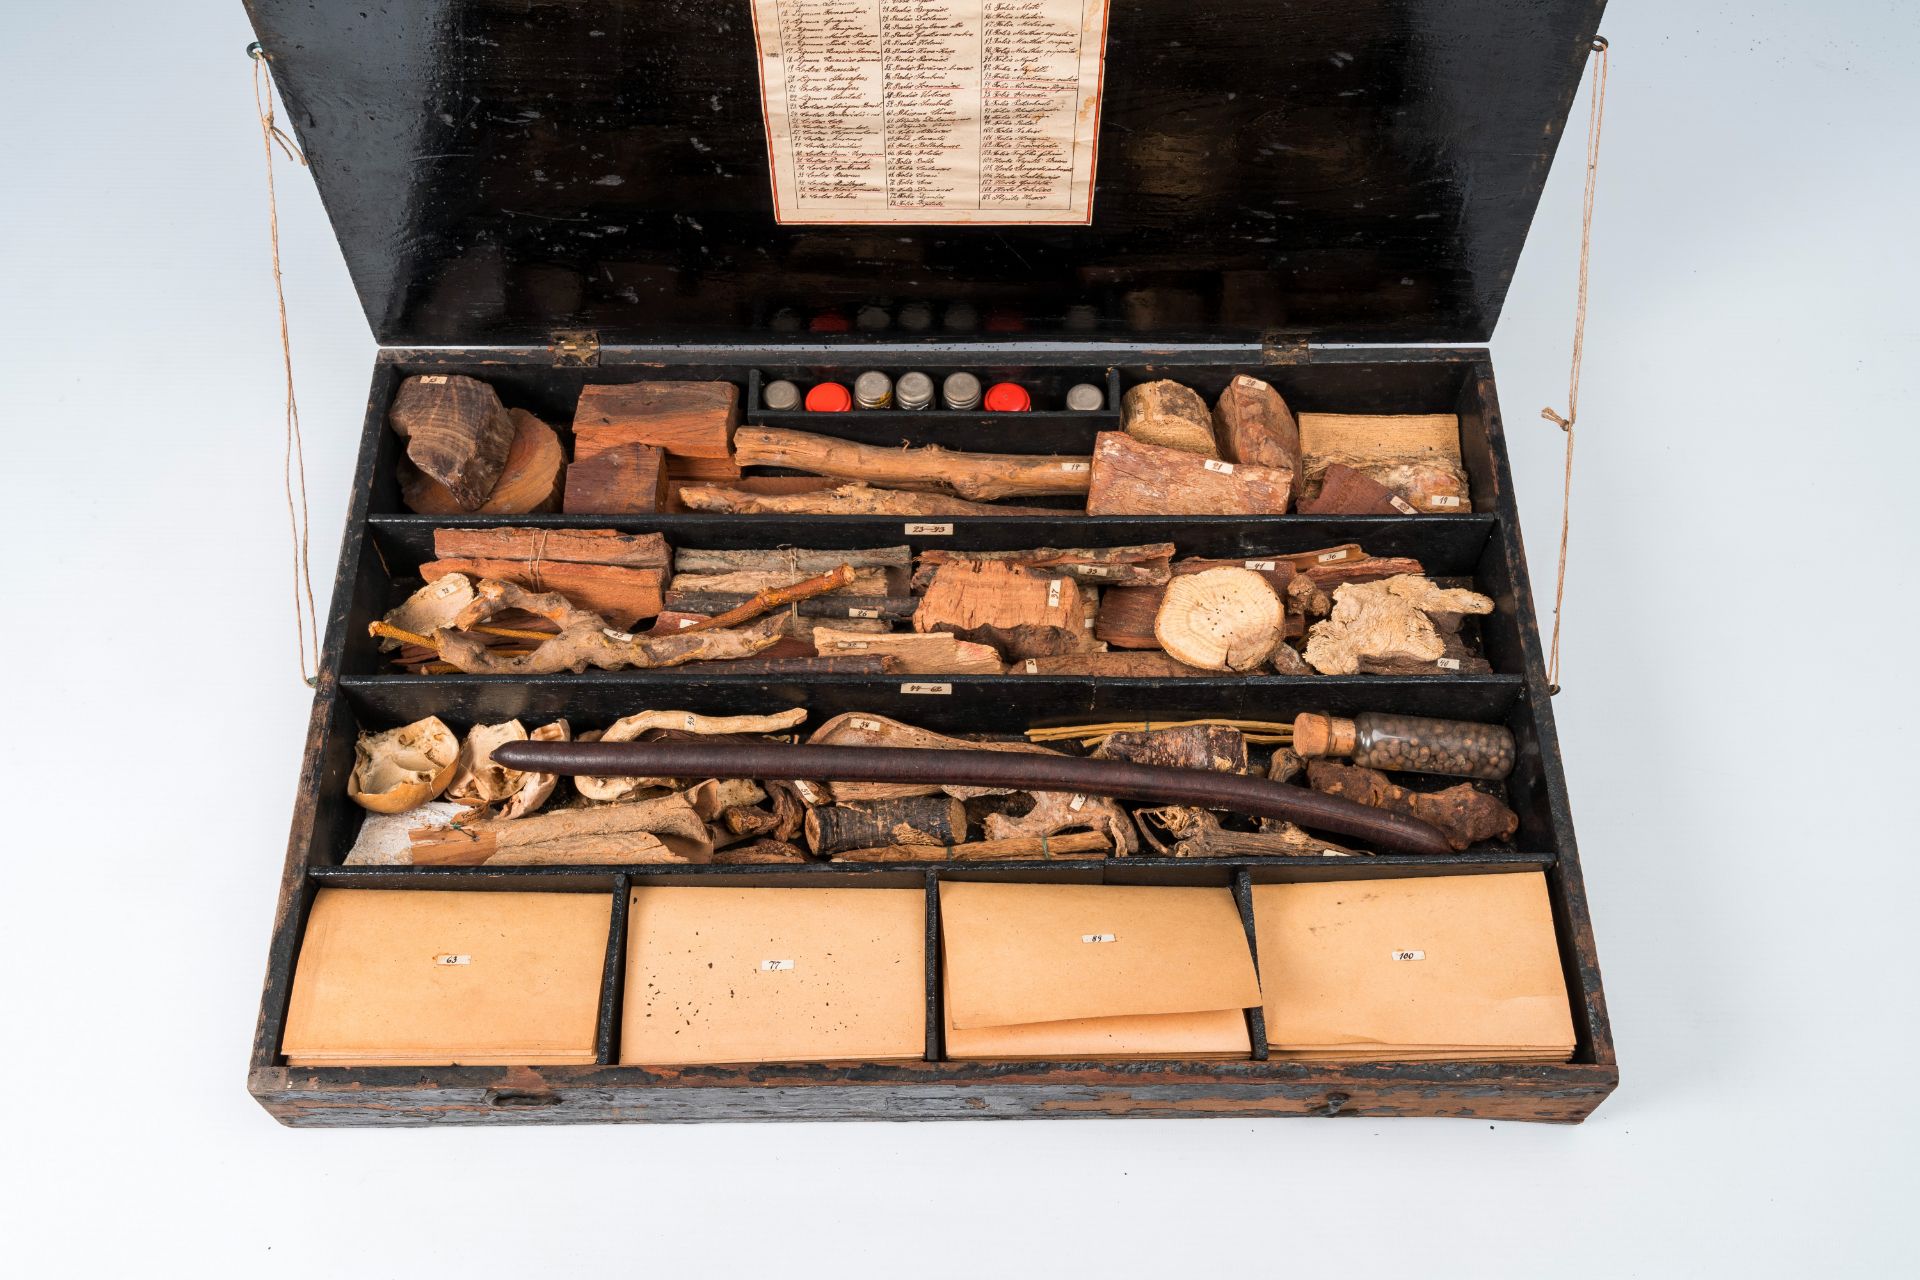 An extensive natural history collection with various types of wood, seeds, fruits, plant remains, mi - Bild 4 aus 34